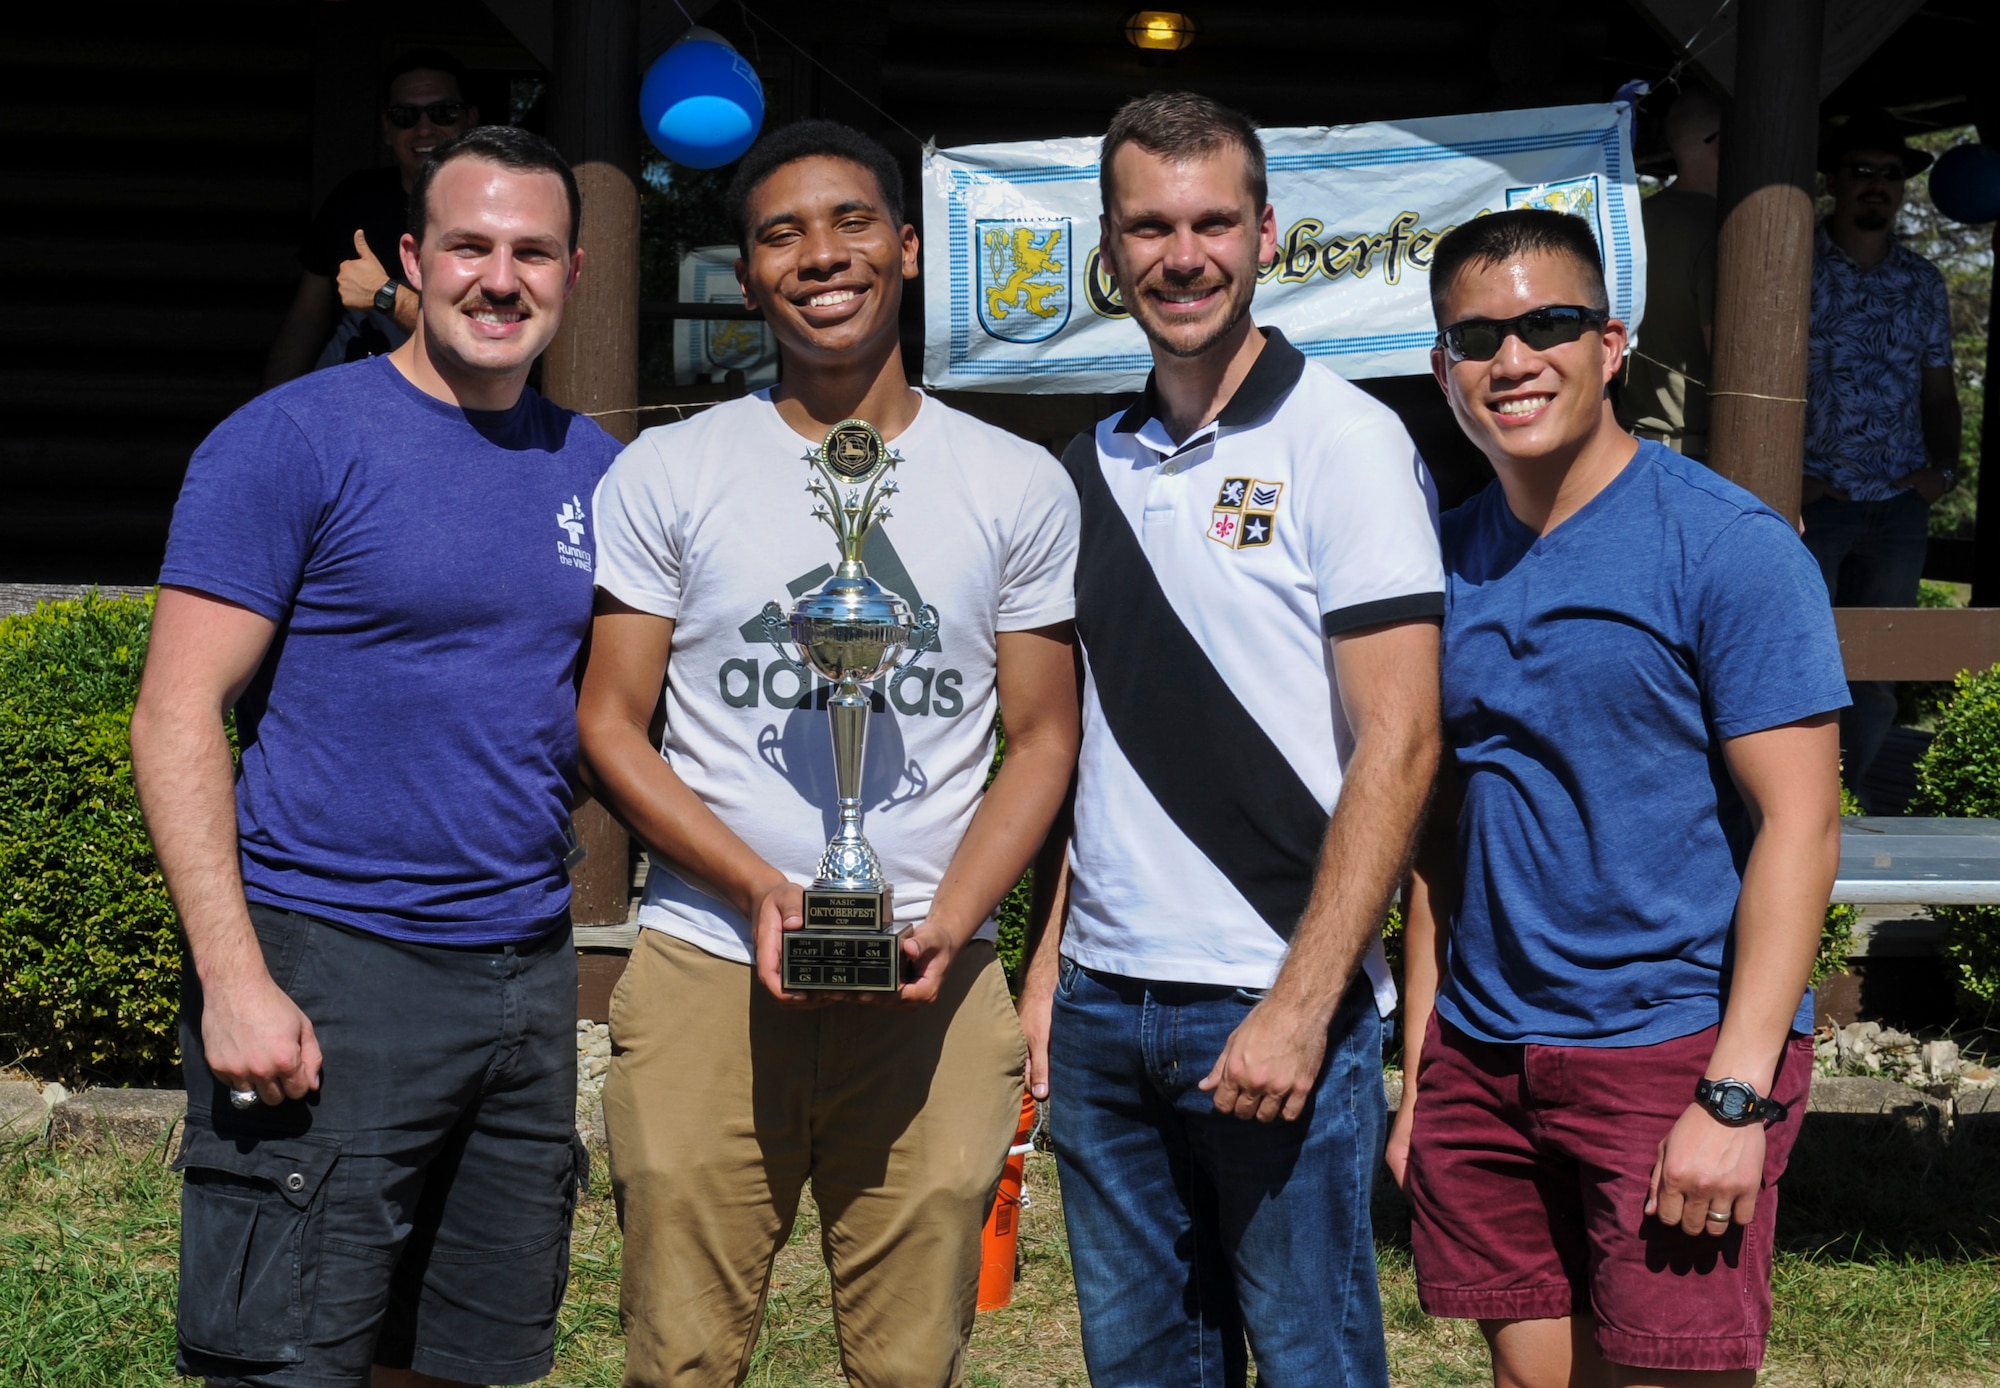 Air and Cyberspace Intelligence Group members celebrate their Oktoberfest Cup victory at Bass Lake, Wright-Patterson Air Force Base, Ohio on Sept. 27, 2019. The group gathered the most points earning them the 2019 top spot among the other NASIC groups. (U.S. Air Force photo by Senior Airman Samuel Earick/Released)